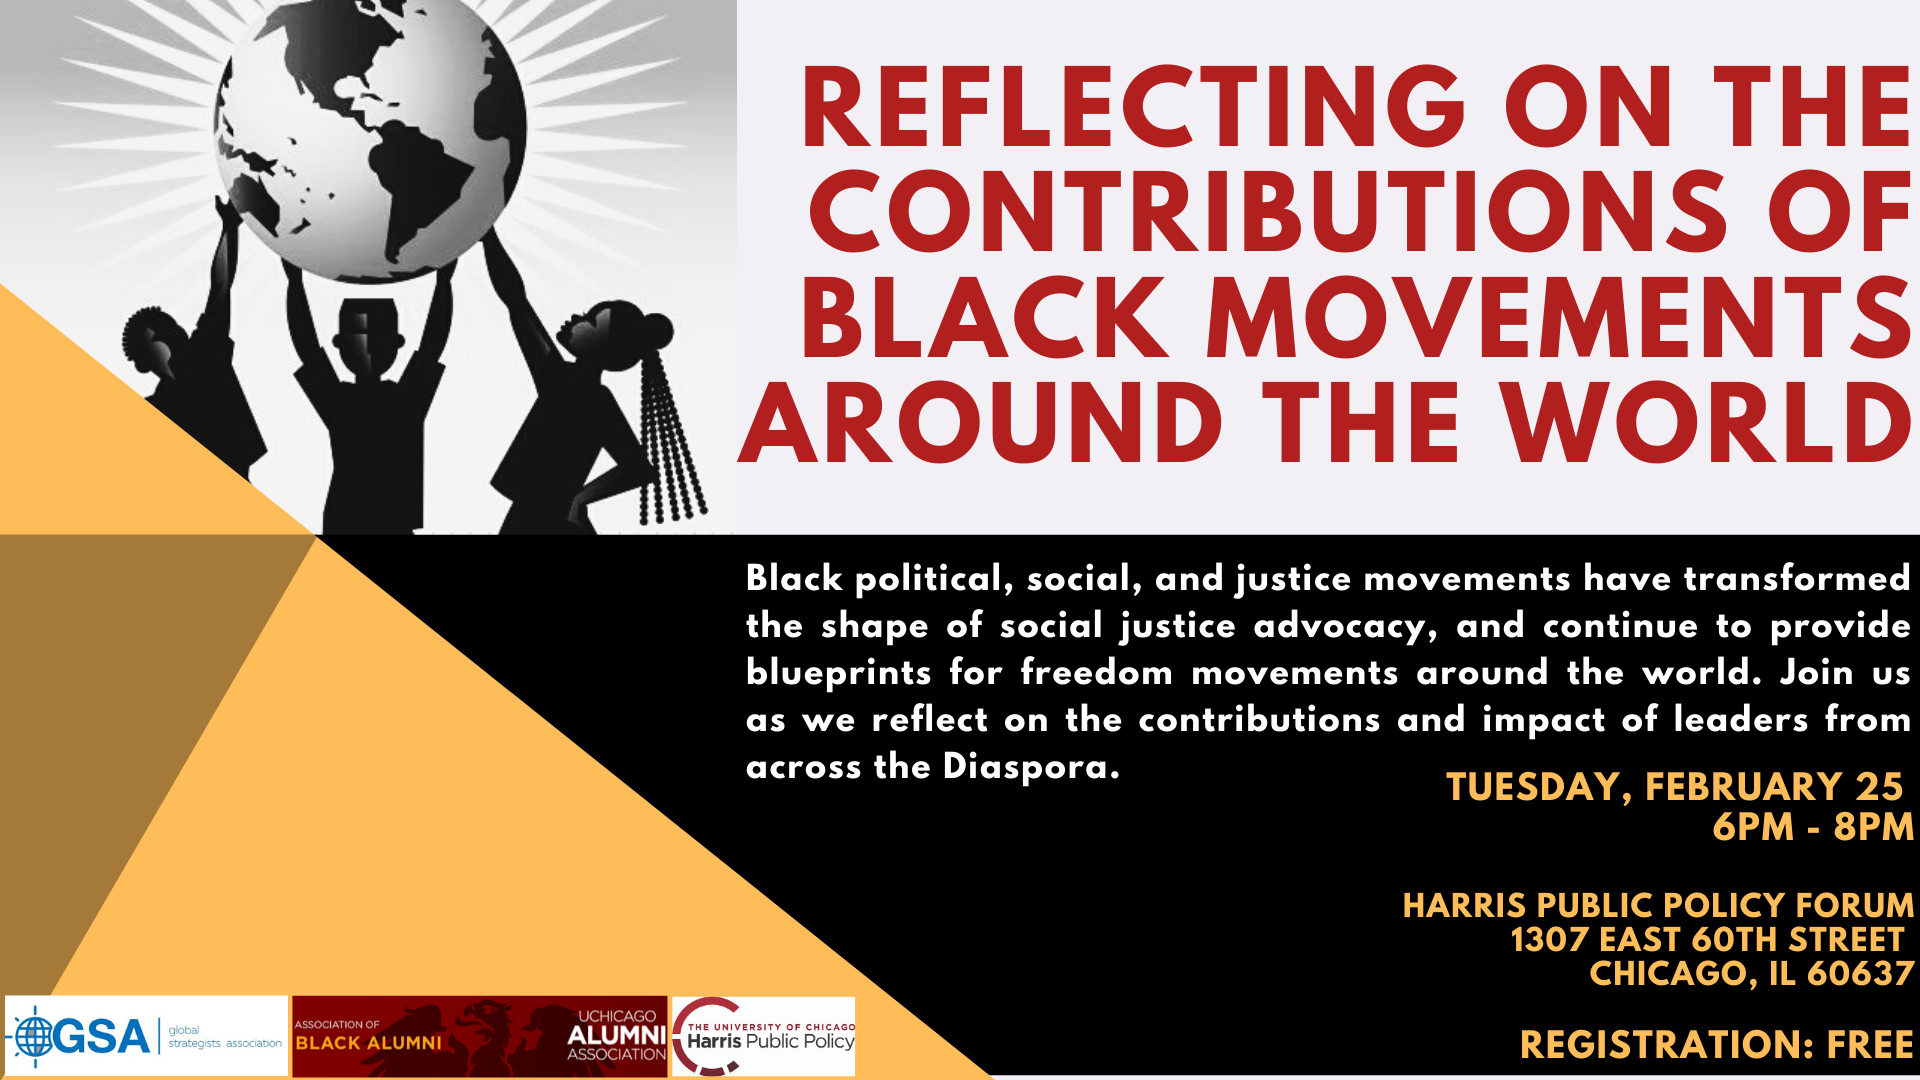 Reflecting on The Contributions of Black Movements Around The World